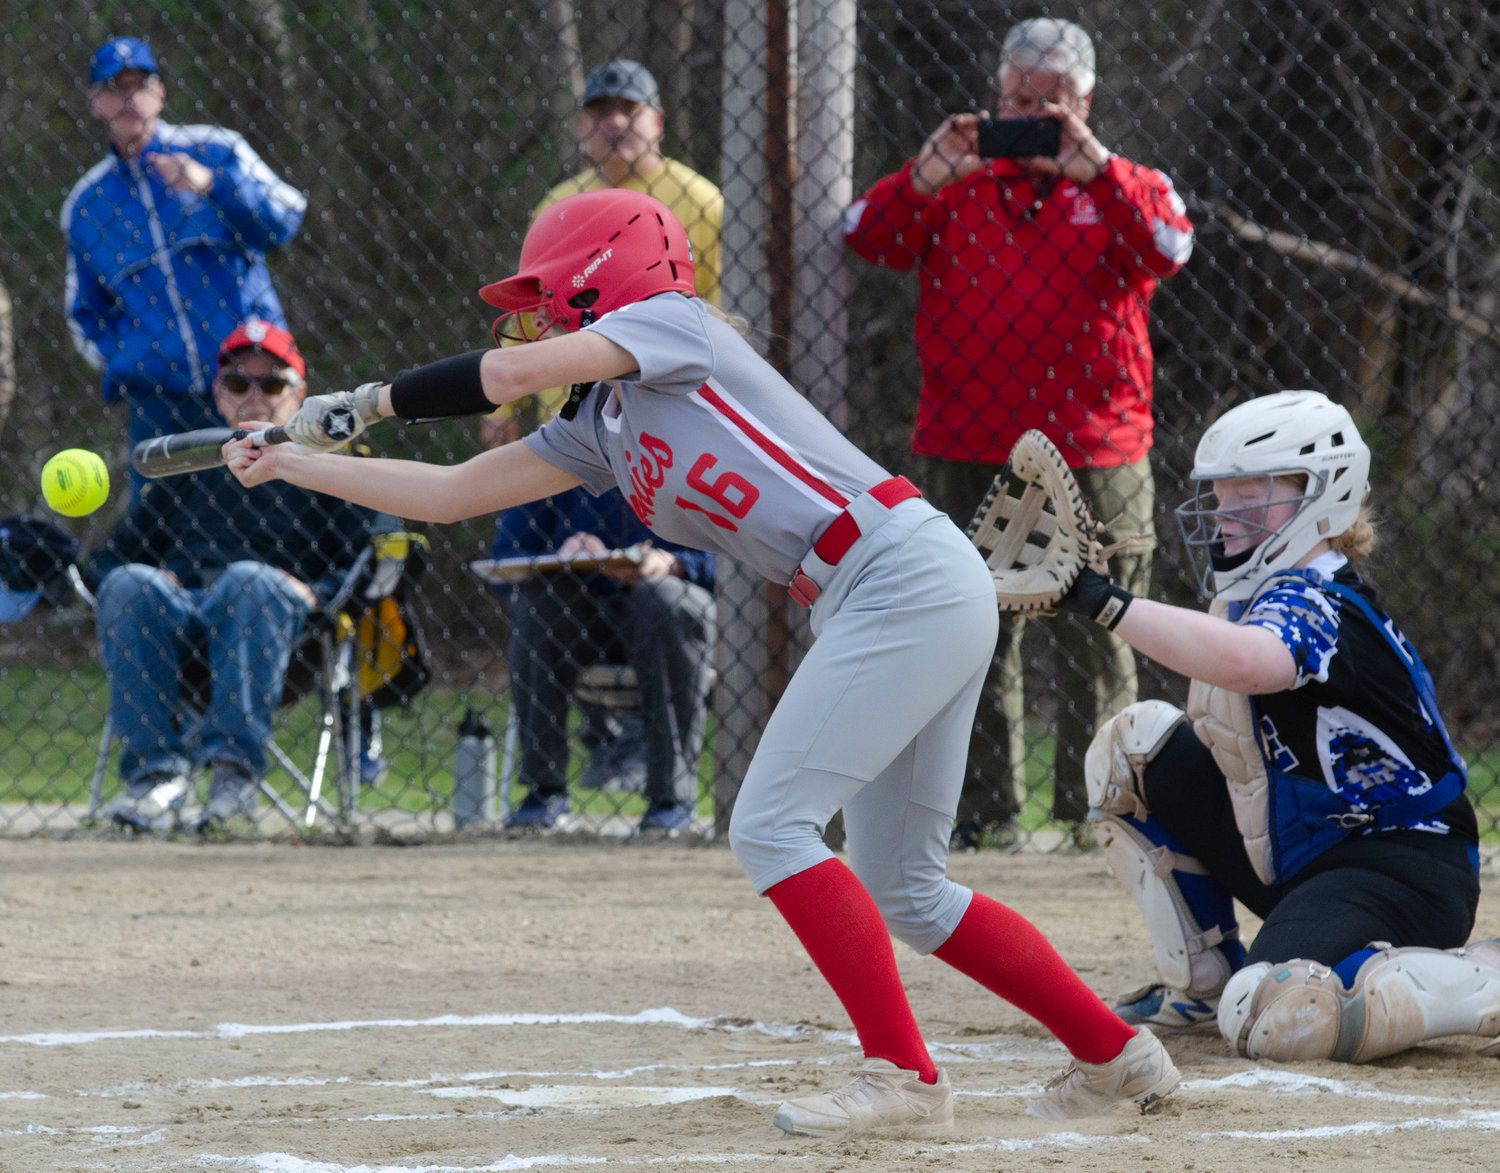 Ava Mendence attempts to bunt her way to first base.